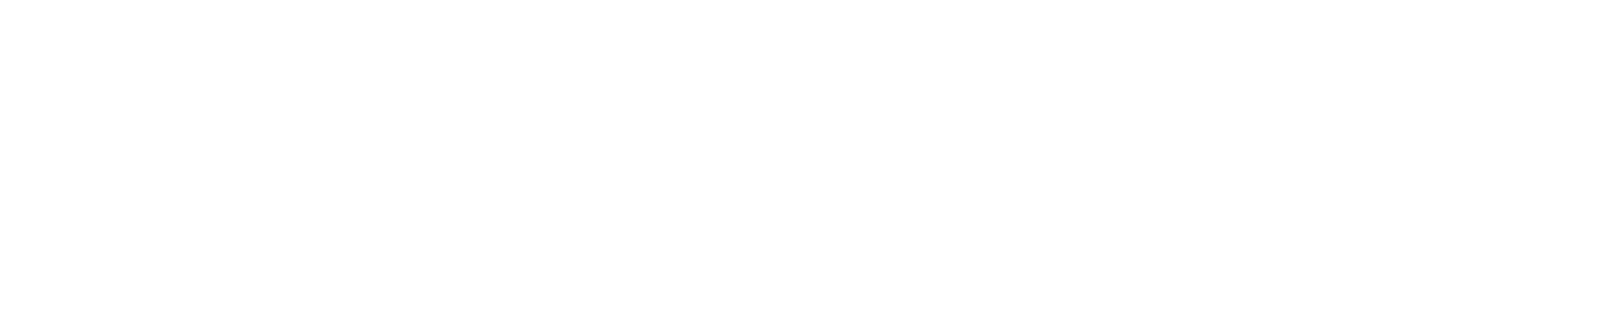 Cornell Dairy Center of Excellence